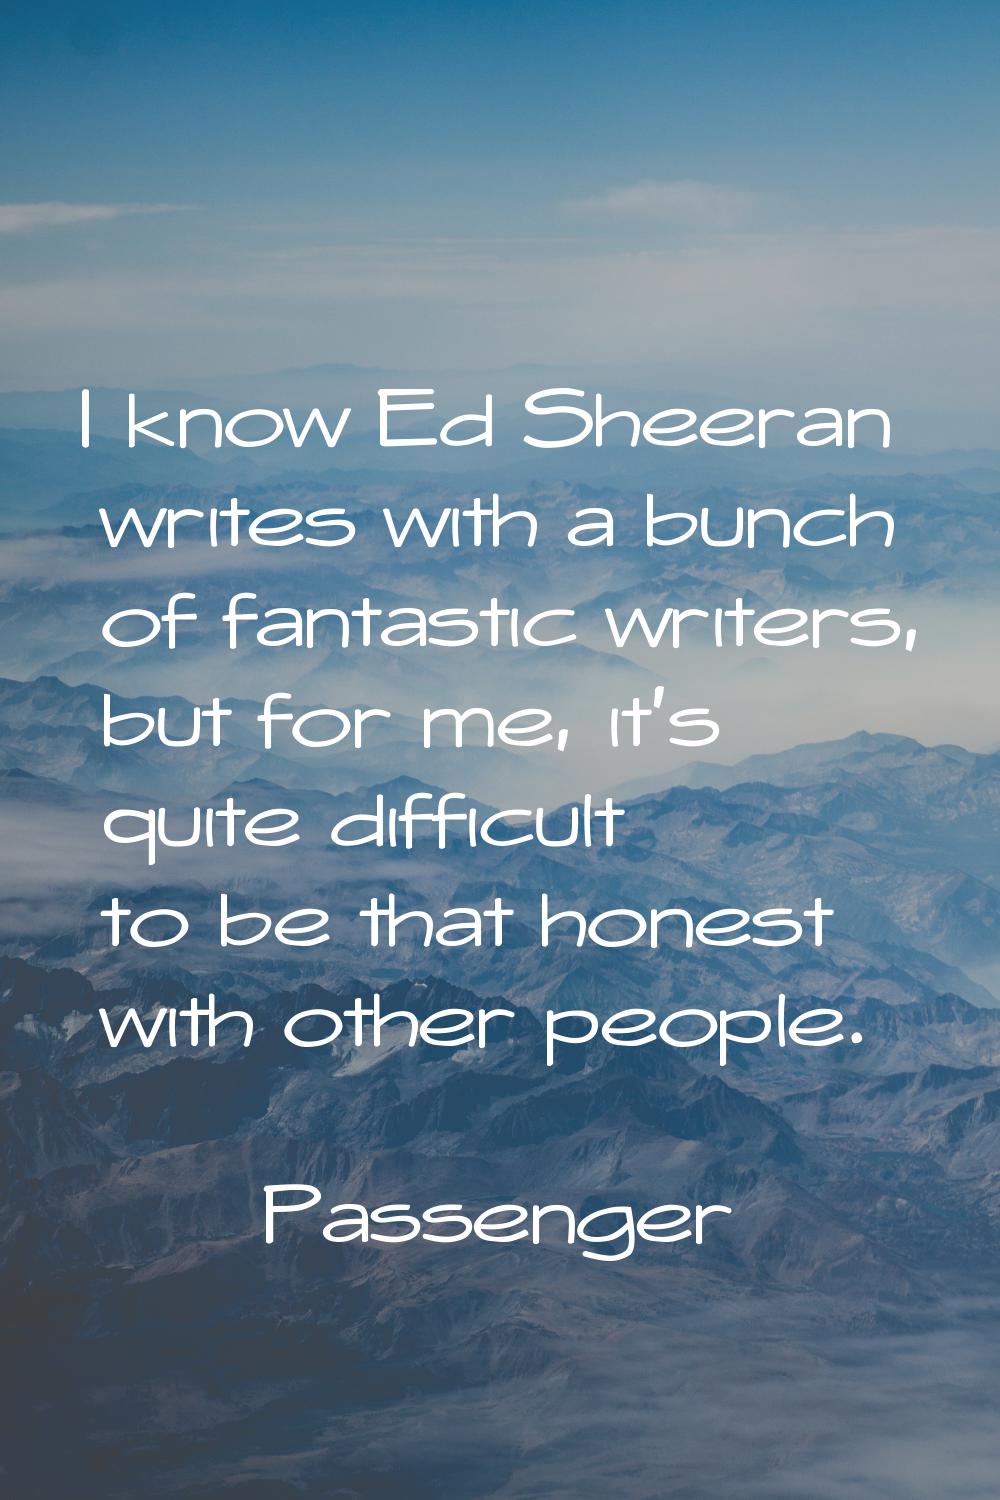 I know Ed Sheeran writes with a bunch of fantastic writers, but for me, it's quite difficult to be 